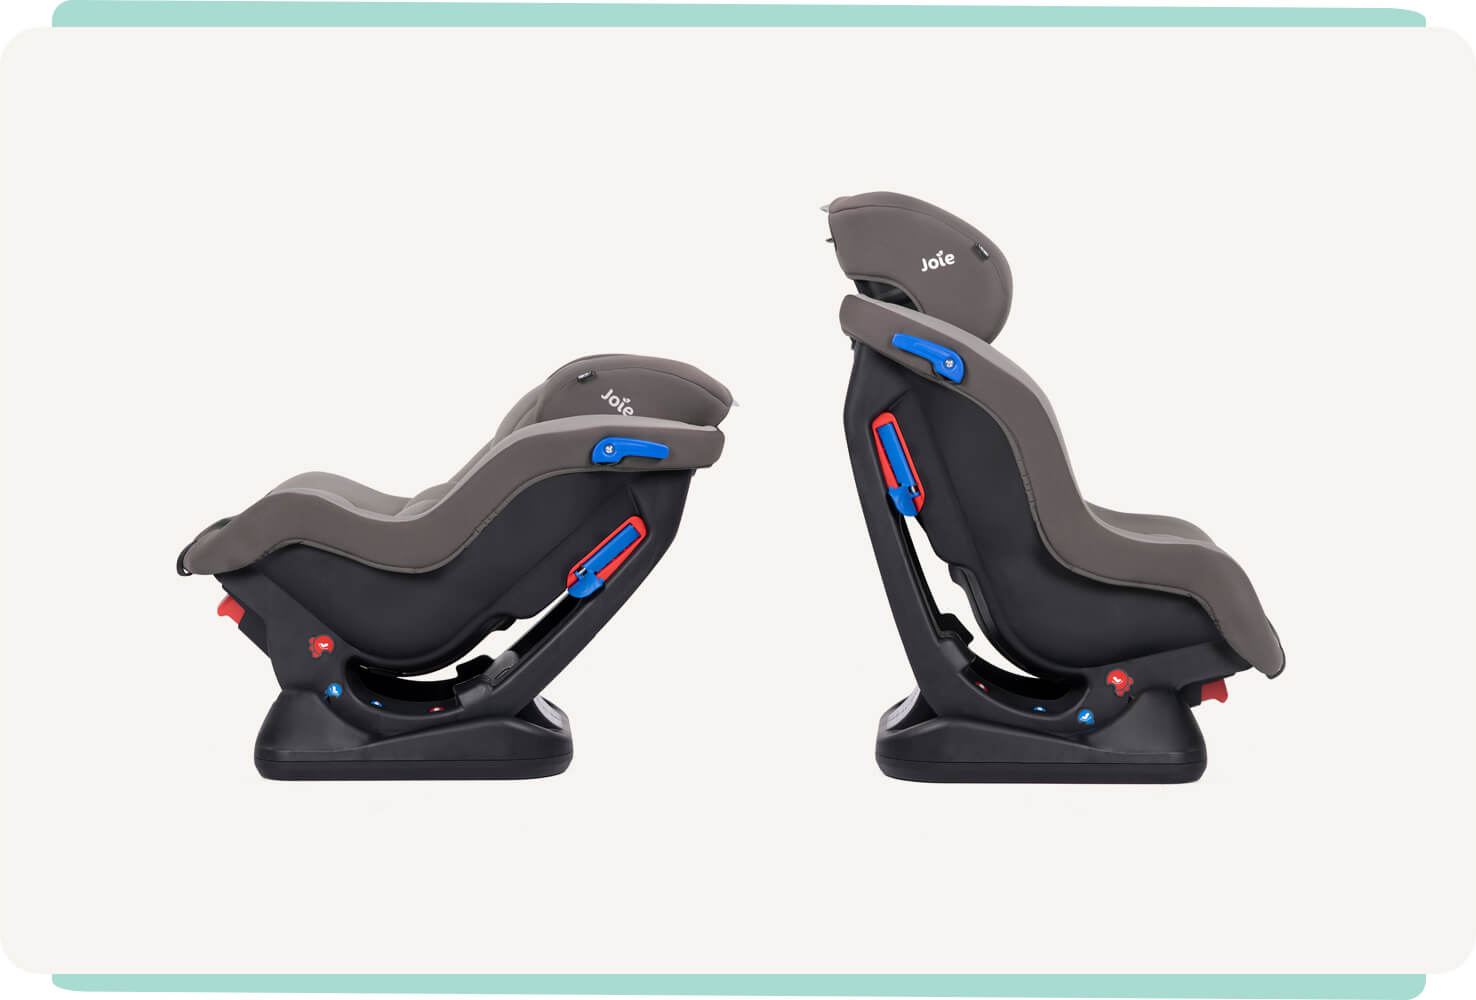 Two Joie Steadi car seat, one on the left that is full reclined postion and one on the right has the highest position headrest with a tan two tone colour, at a side angle.